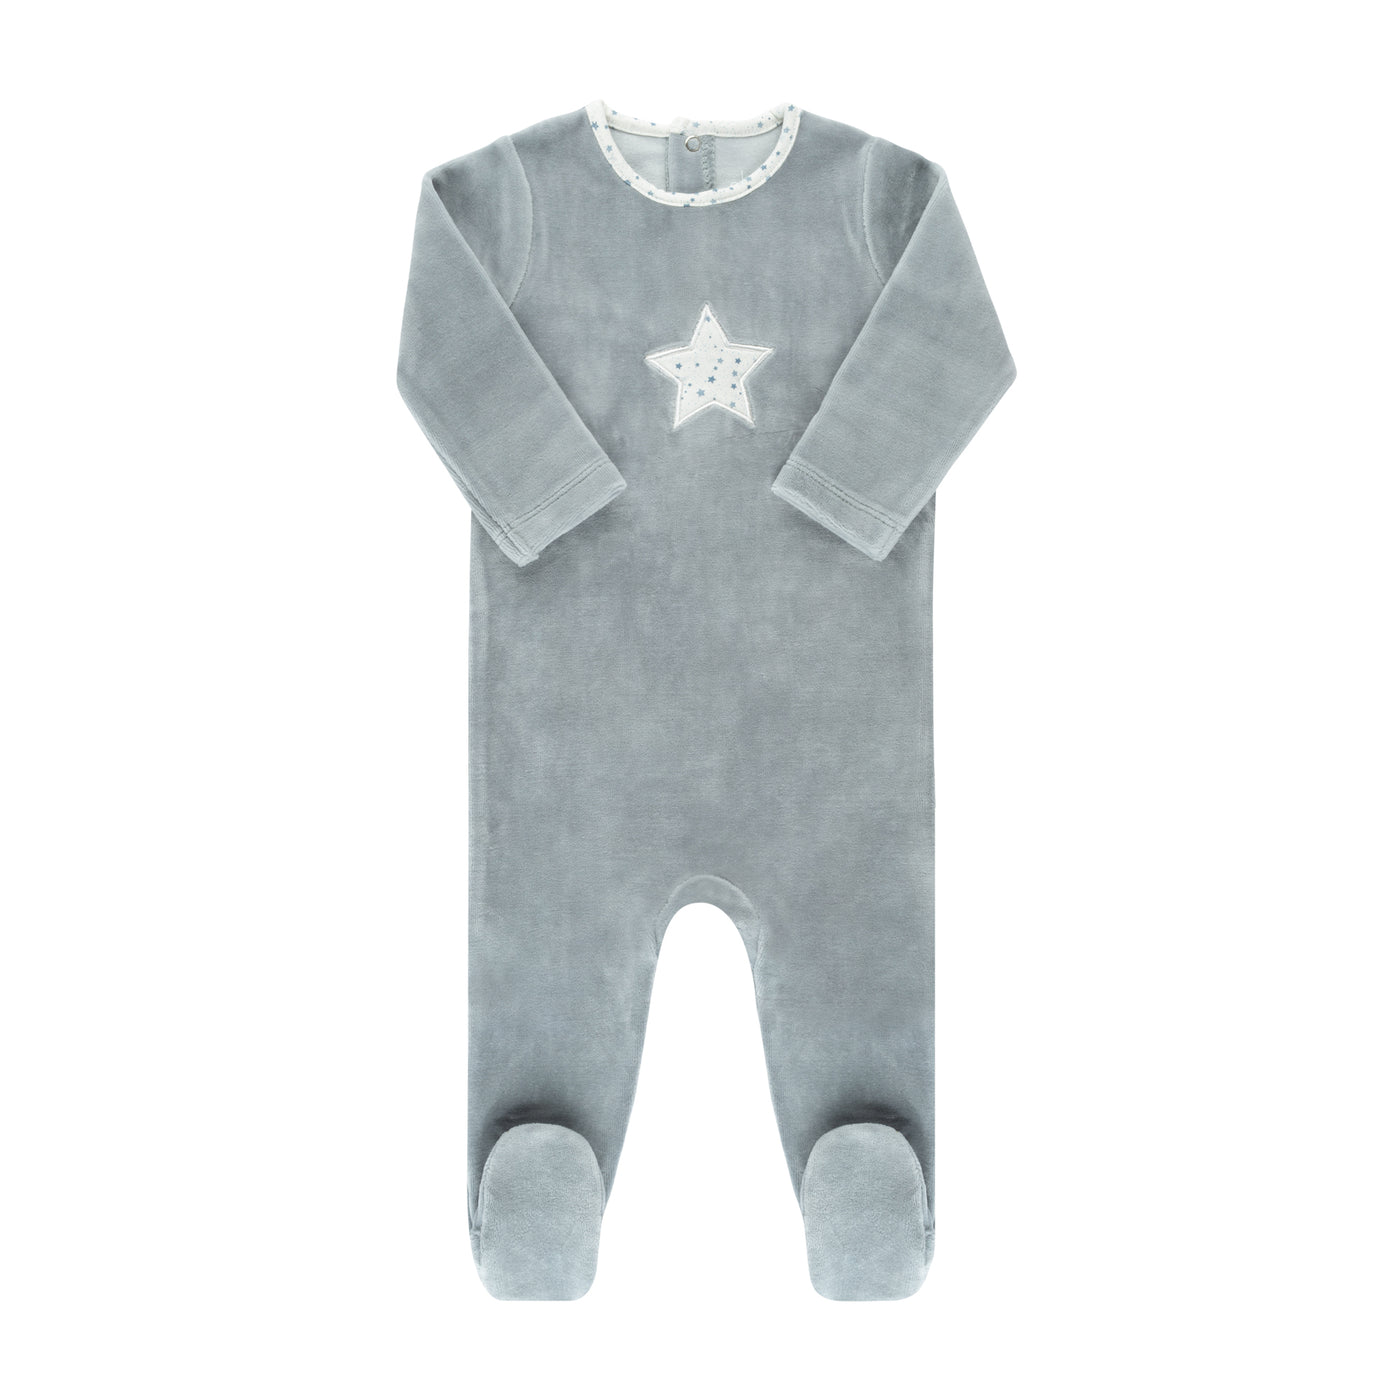 Ely's & Co. Star Blue Velour Footie